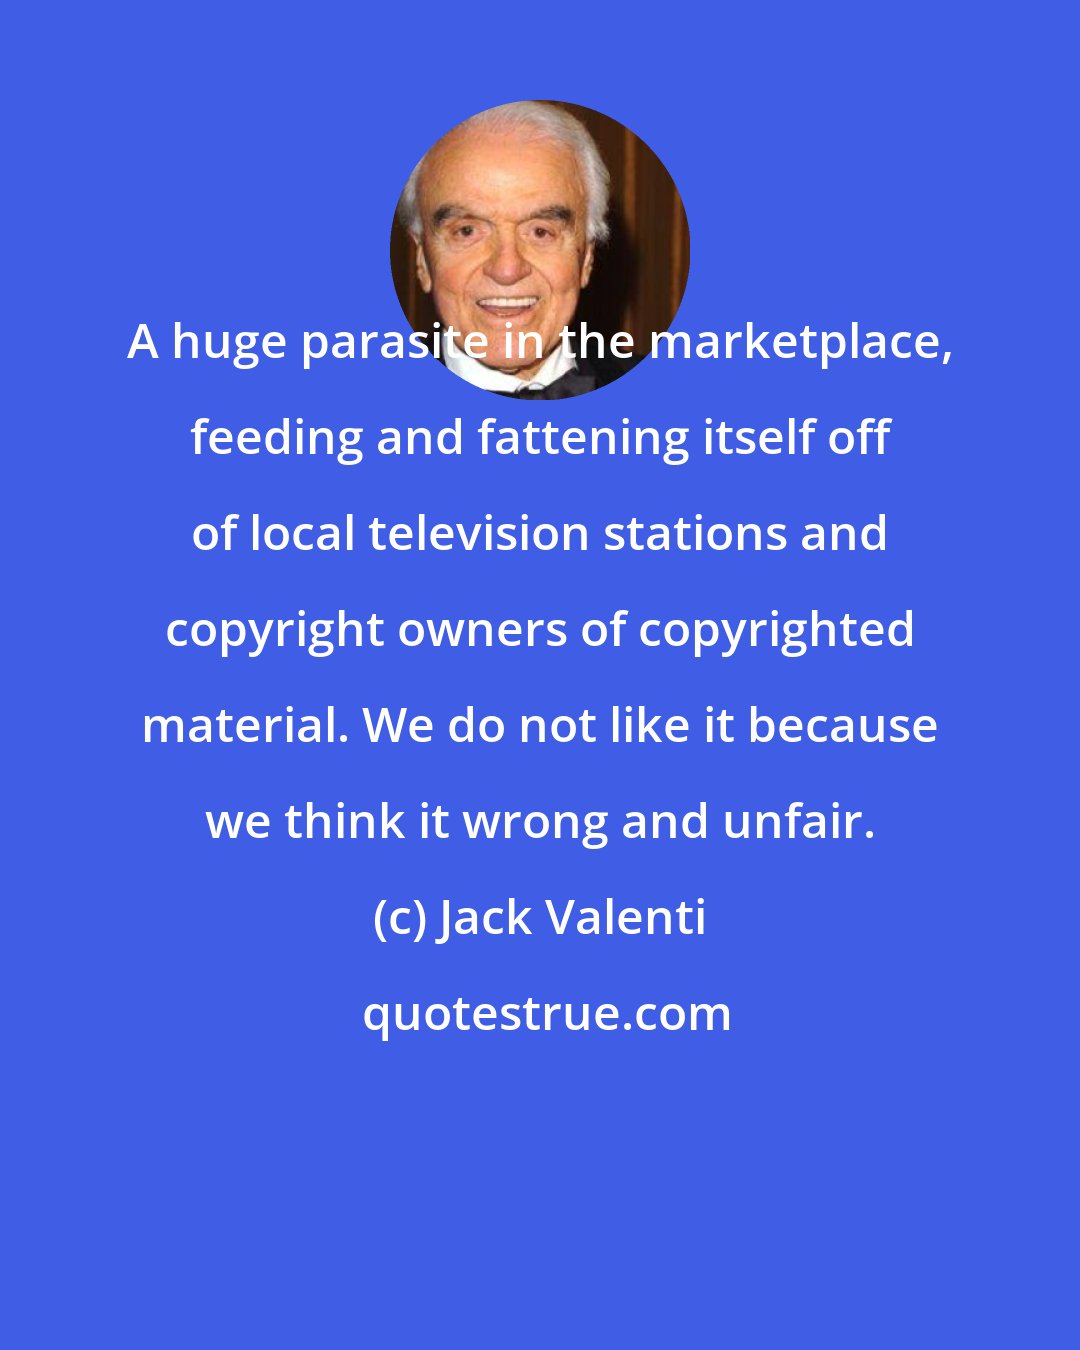 Jack Valenti: A huge parasite in the marketplace, feeding and fattening itself off of local television stations and copyright owners of copyrighted material. We do not like it because we think it wrong and unfair.